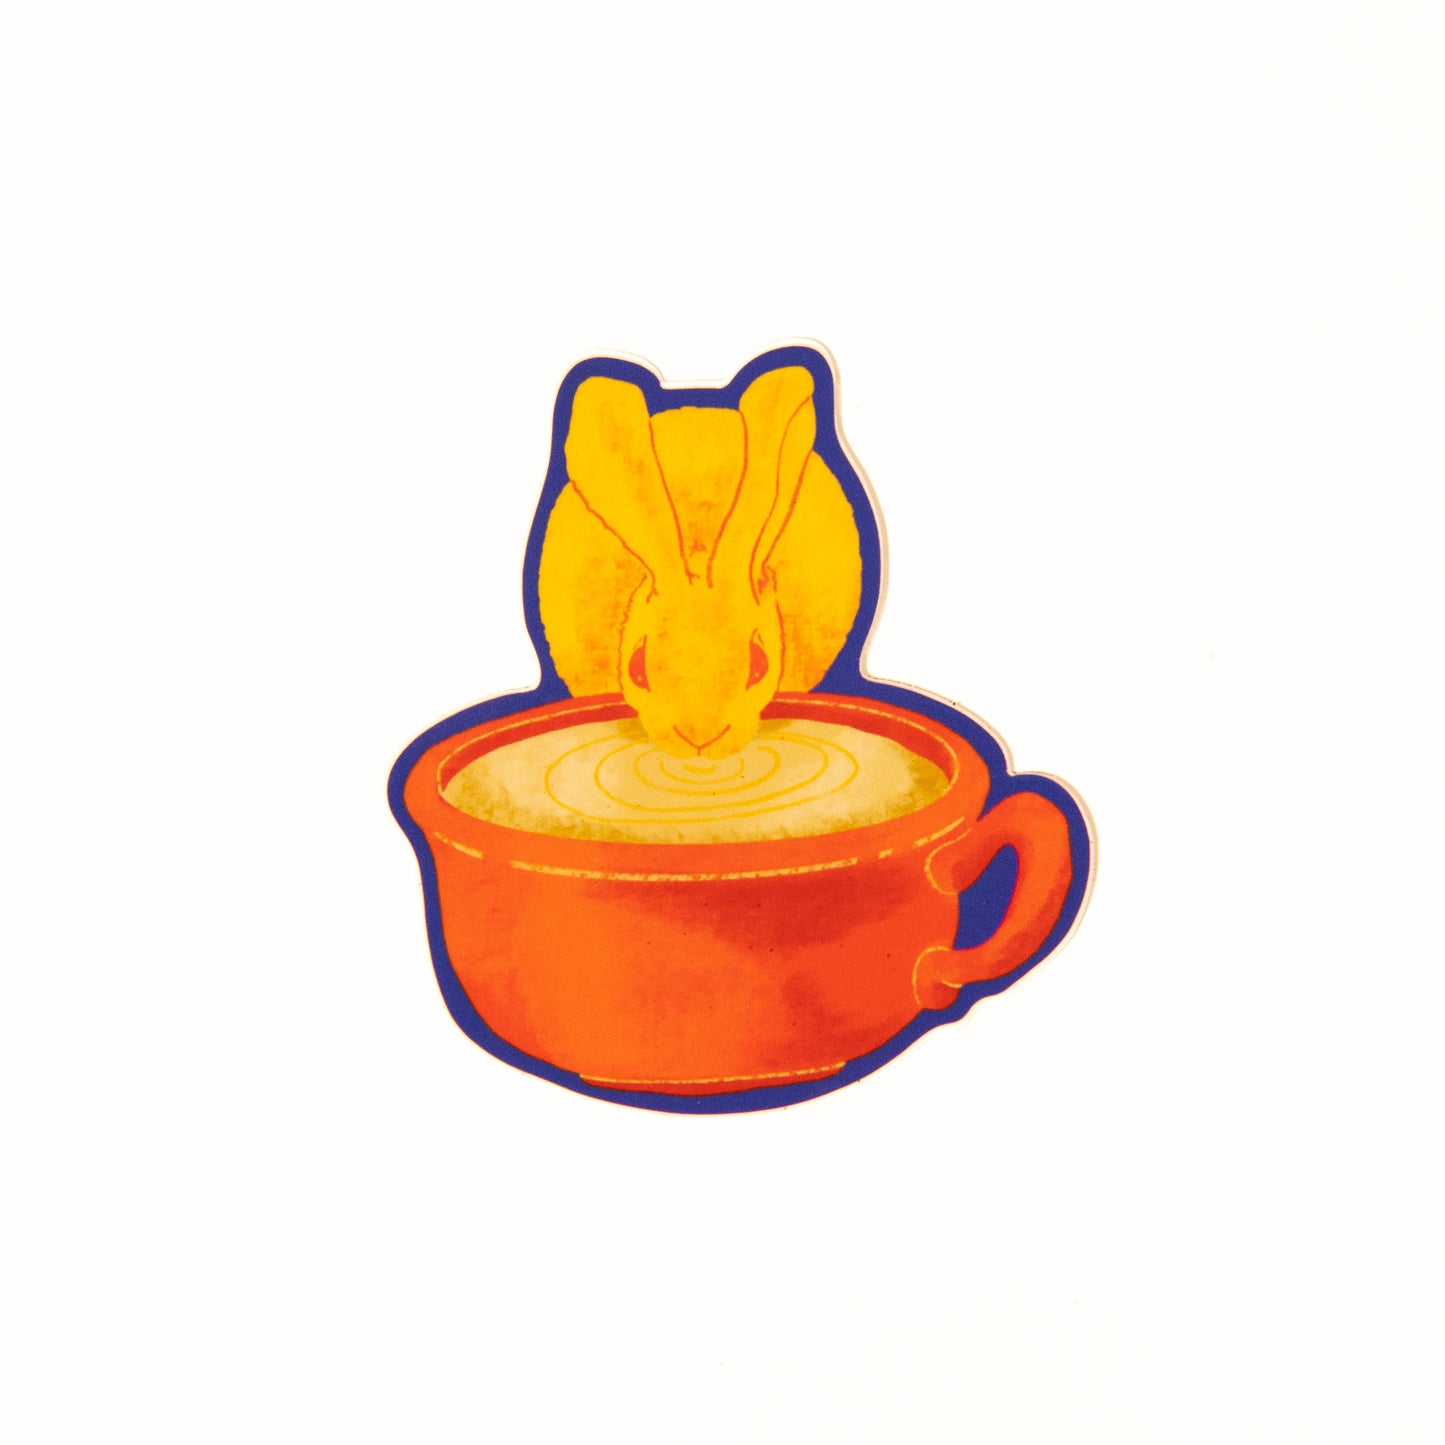 An illustrated drawing called Fika Bunny as a sticker. The illustration shows a yellow furred Desert Cottontail Rabbit taking a sip out of a large mug of coffee. The coffee mug is red in color and has a handle on the right side. The border of the sticker is a bright blue.